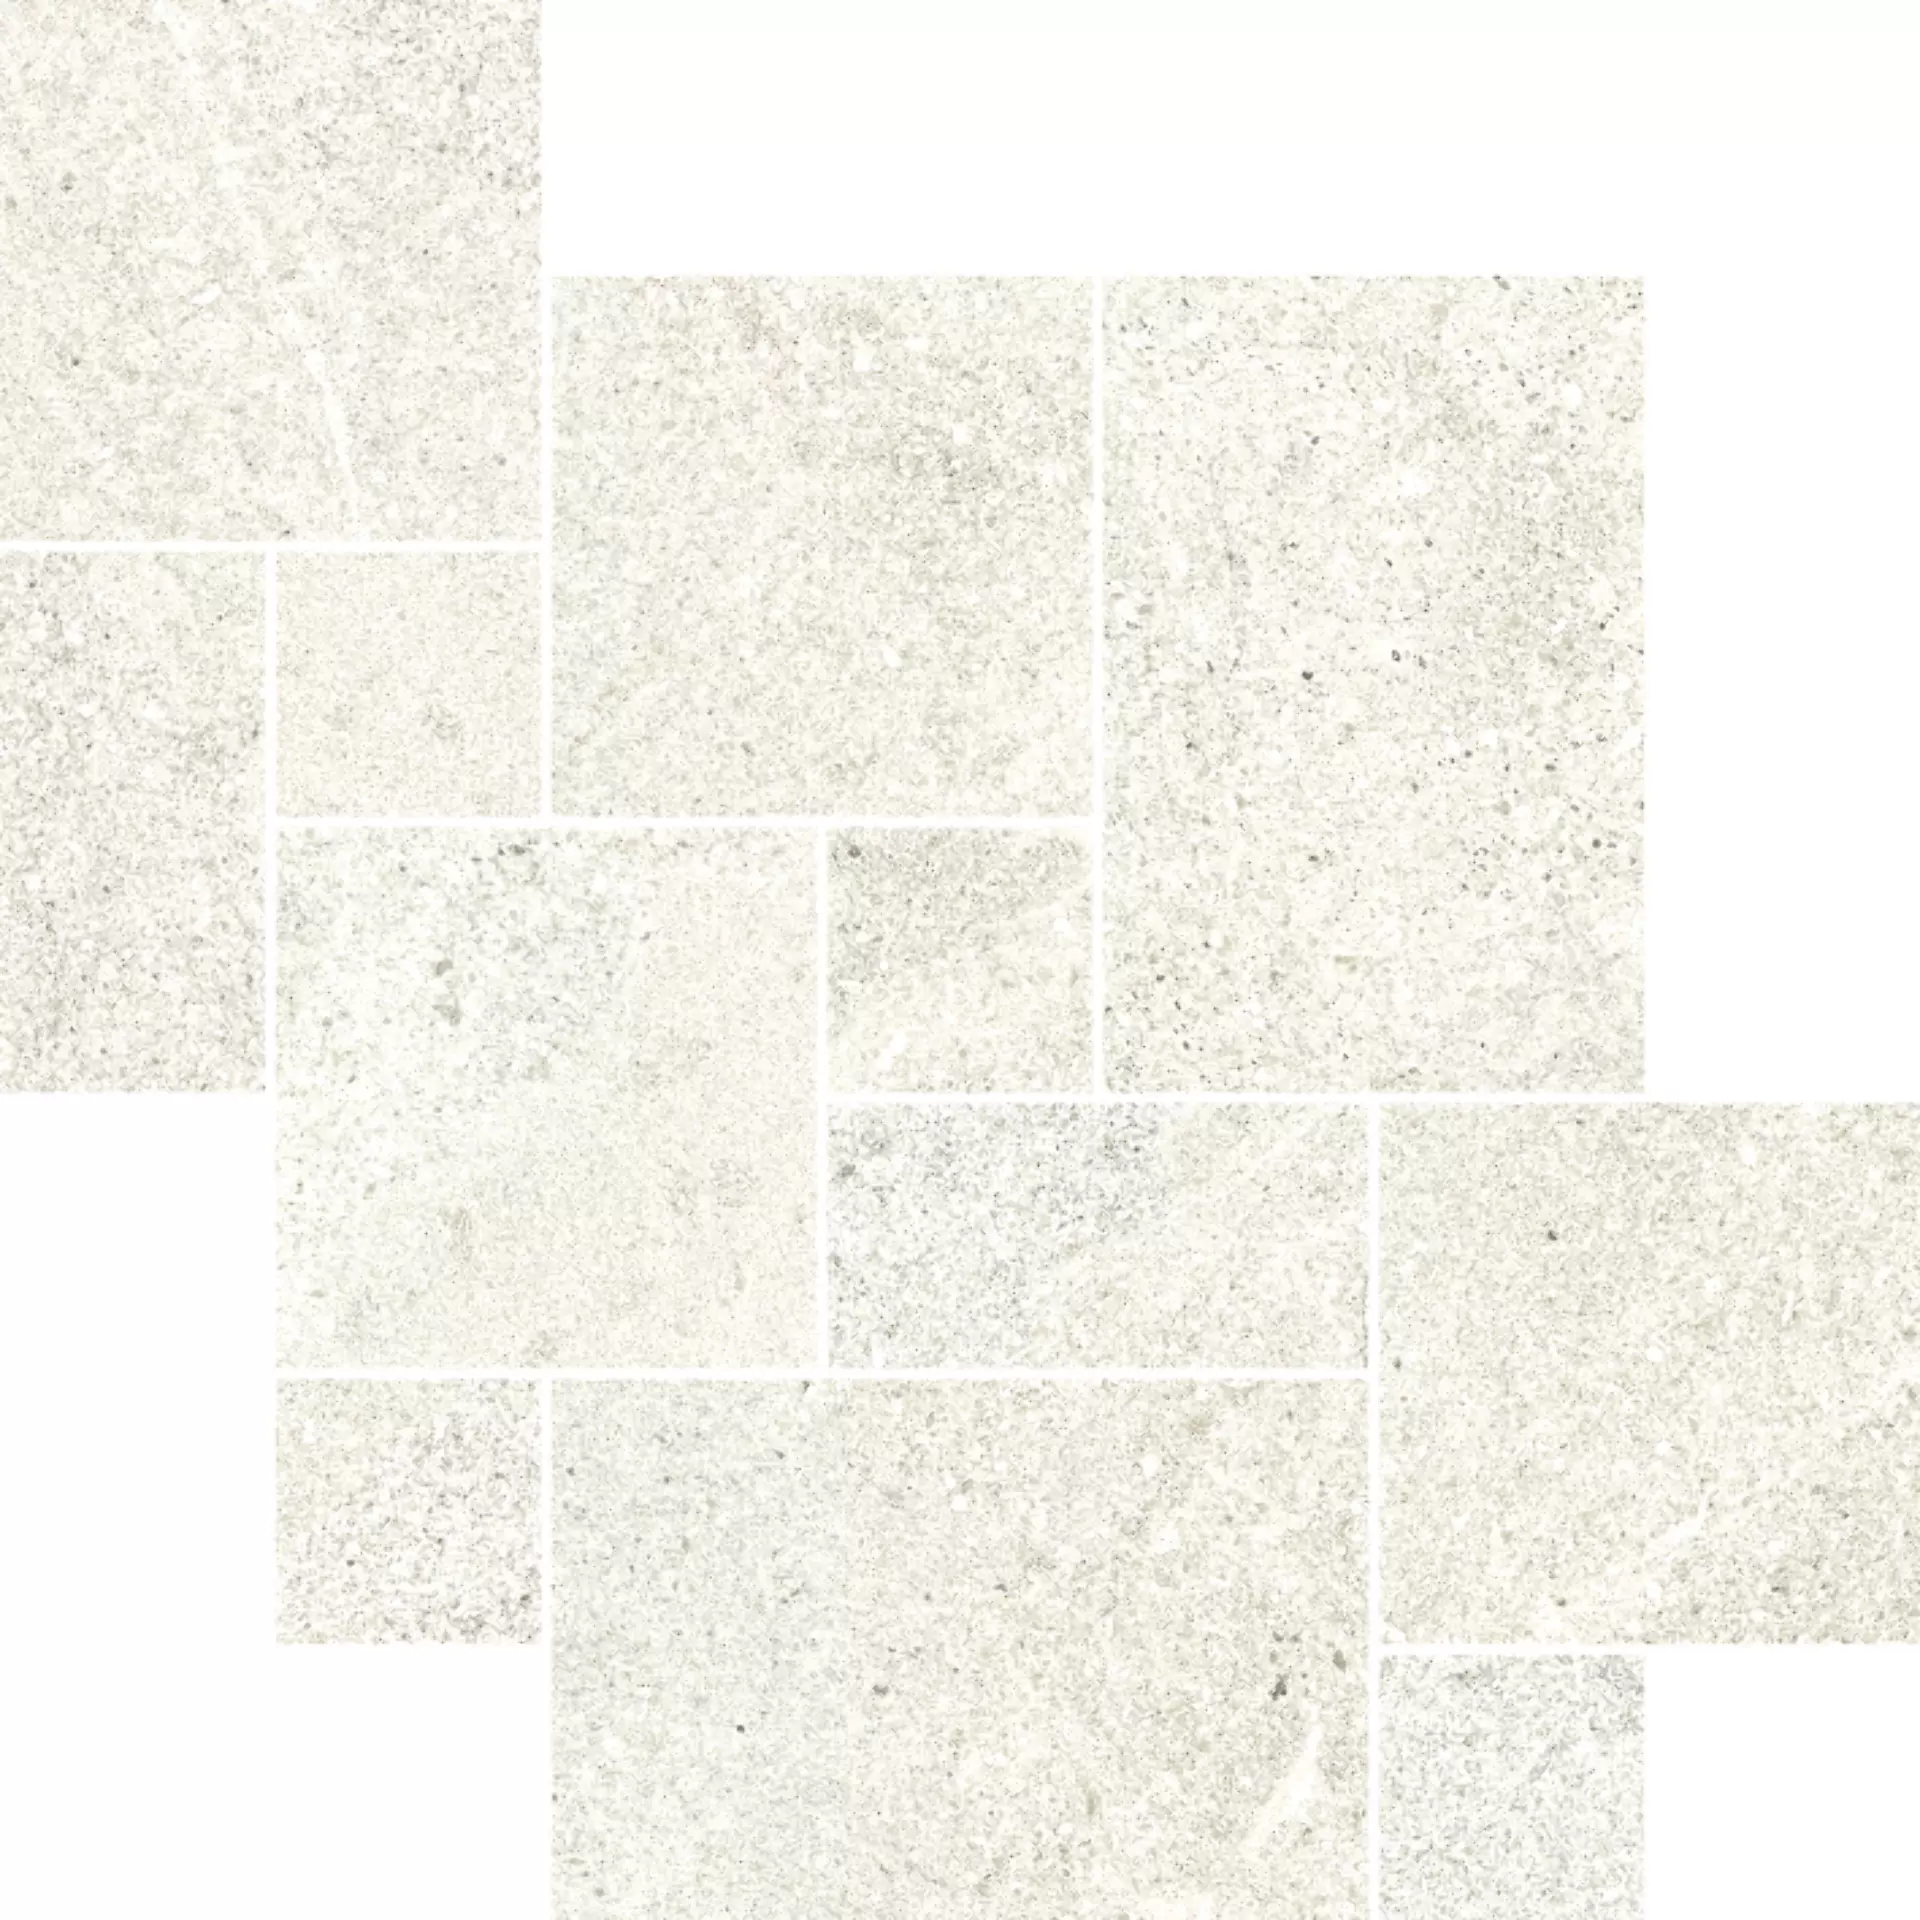 Refin Tune Snow Soft Mosaic NA44 30x30cm rectified 9mm